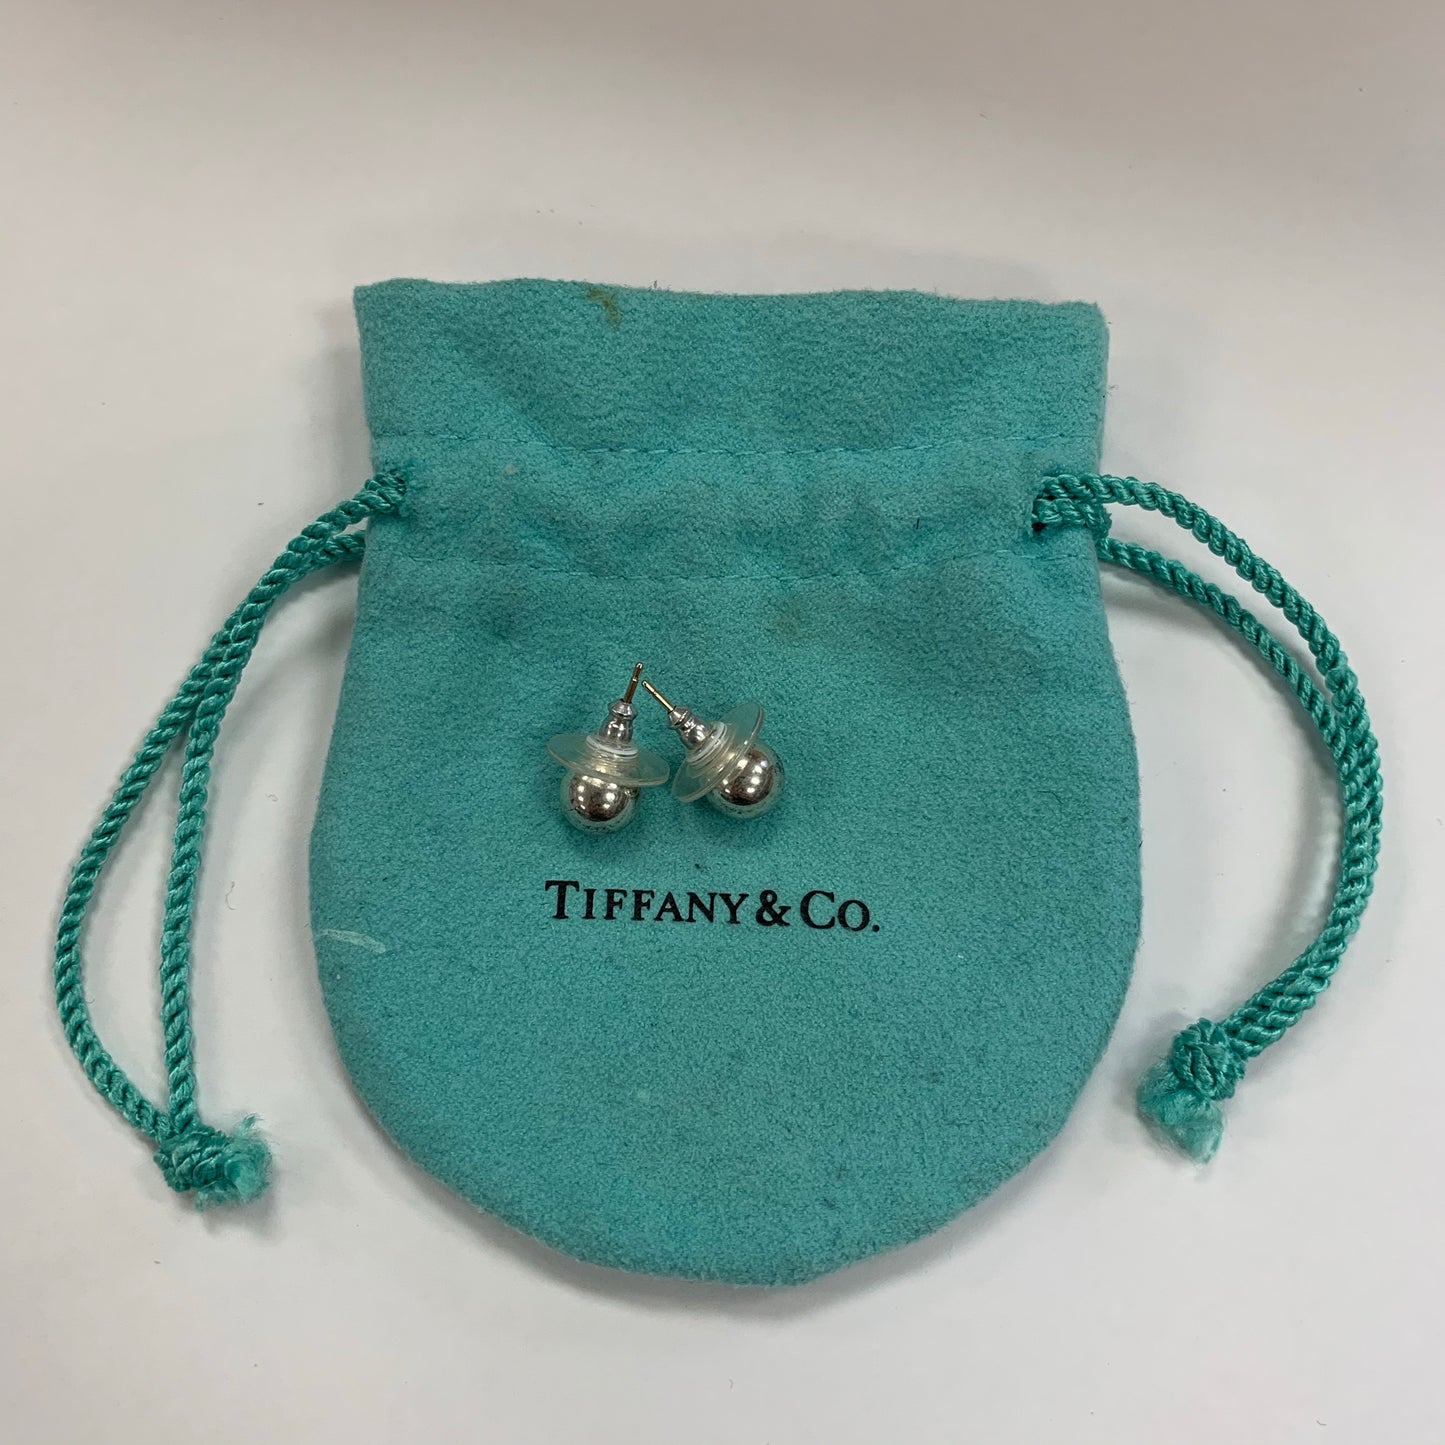 Authentic Tiffany & Co Silver Ball Earrings